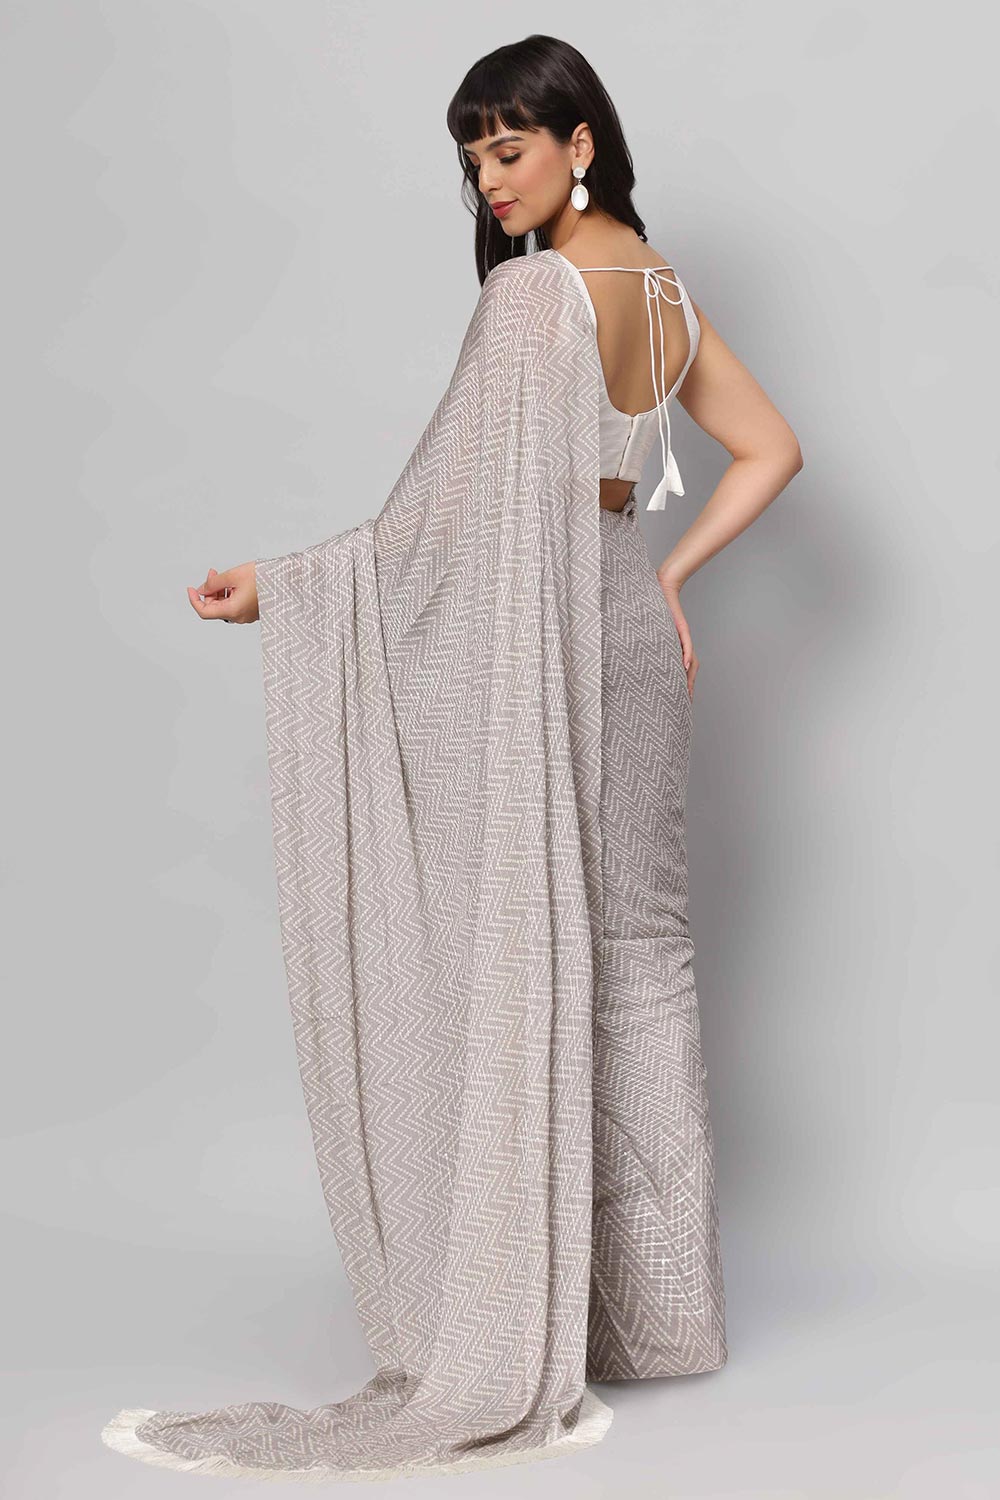 Shop Mehr Grey & White Zigzag Sequins Crepe Silk One Minute Saree at best offer at our  Store - One Minute Saree